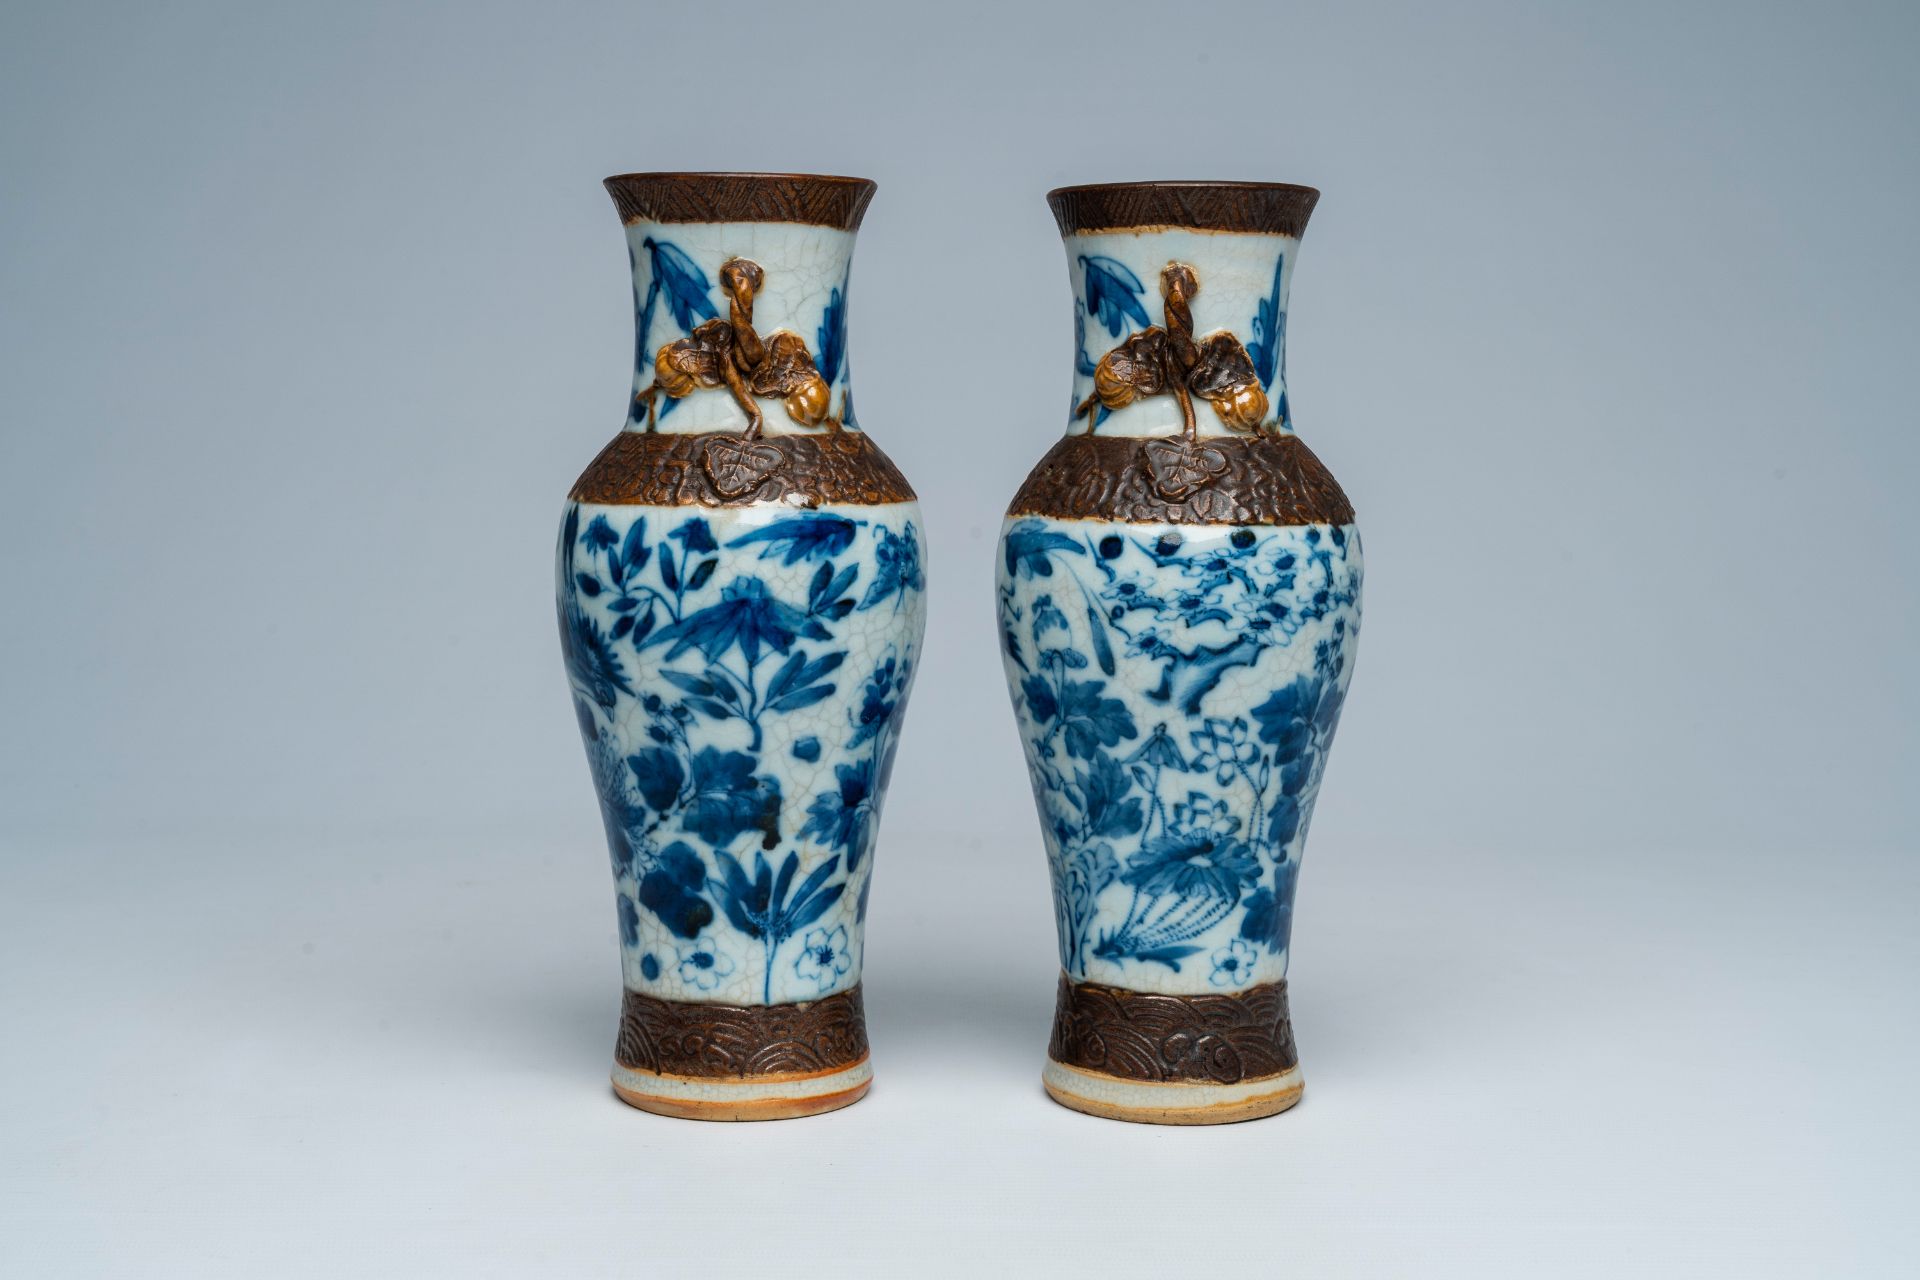 A pair of Chinese Nanking crackle glazed blue and white vases with birds and butterflies among bloss - Image 4 of 6